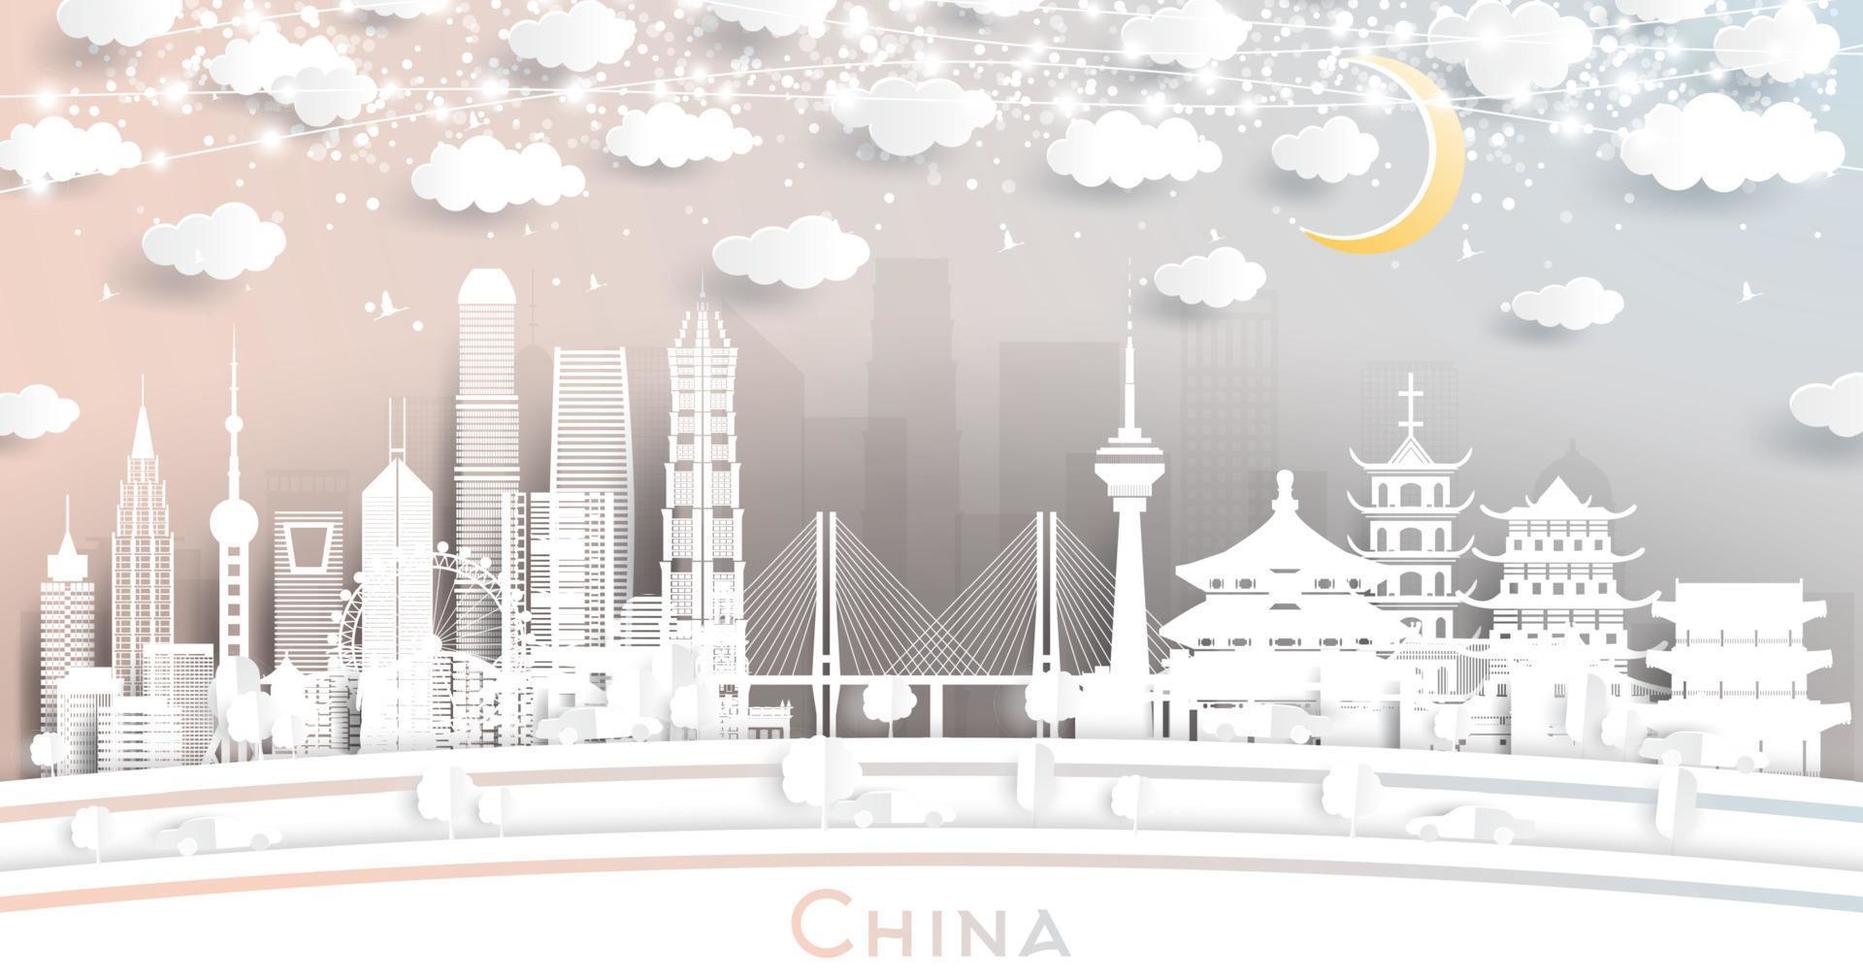 China City Skyline in Paper Cut Style with White Buildings, Moon and Neon Garland. vector